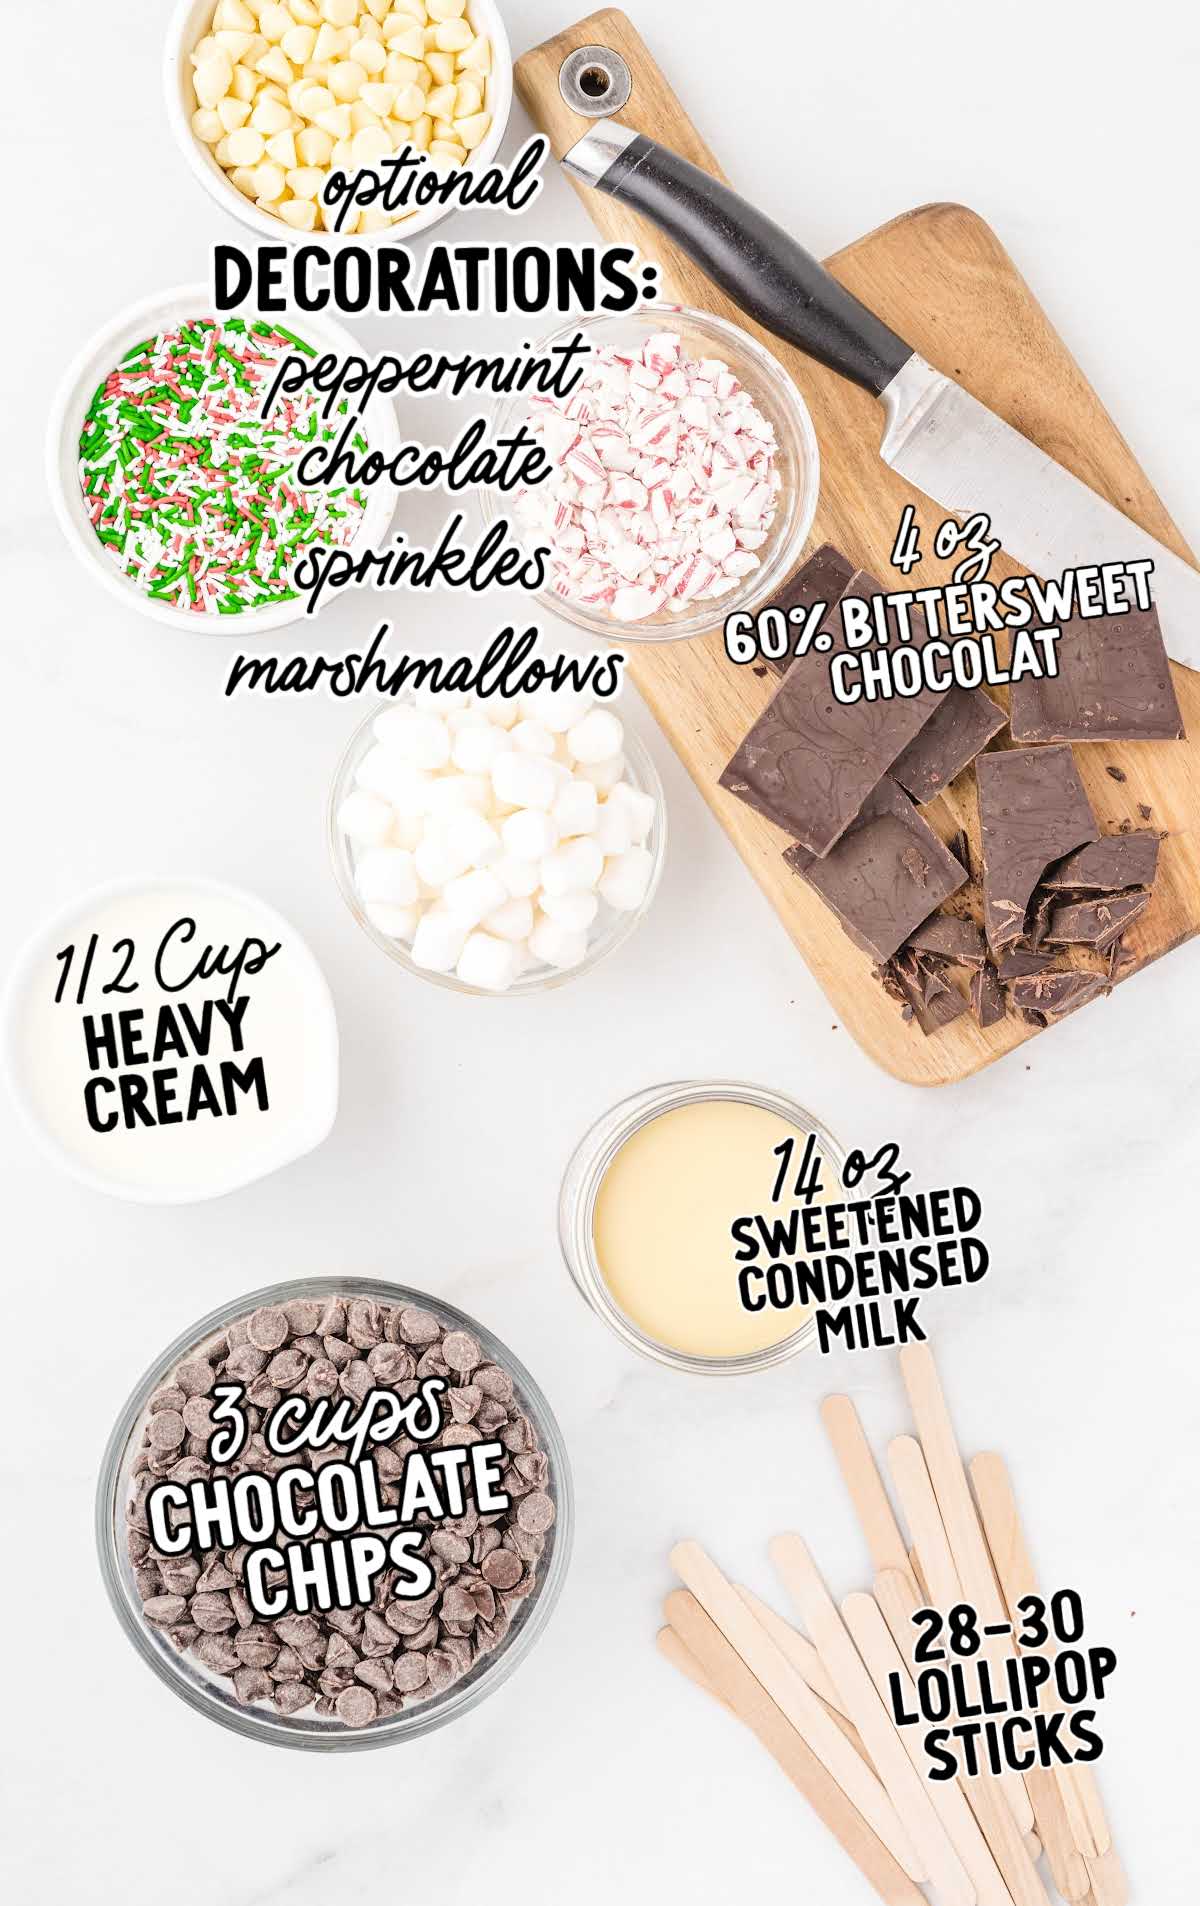 Hot Chocolate on a stick raw ingredients that are labeled